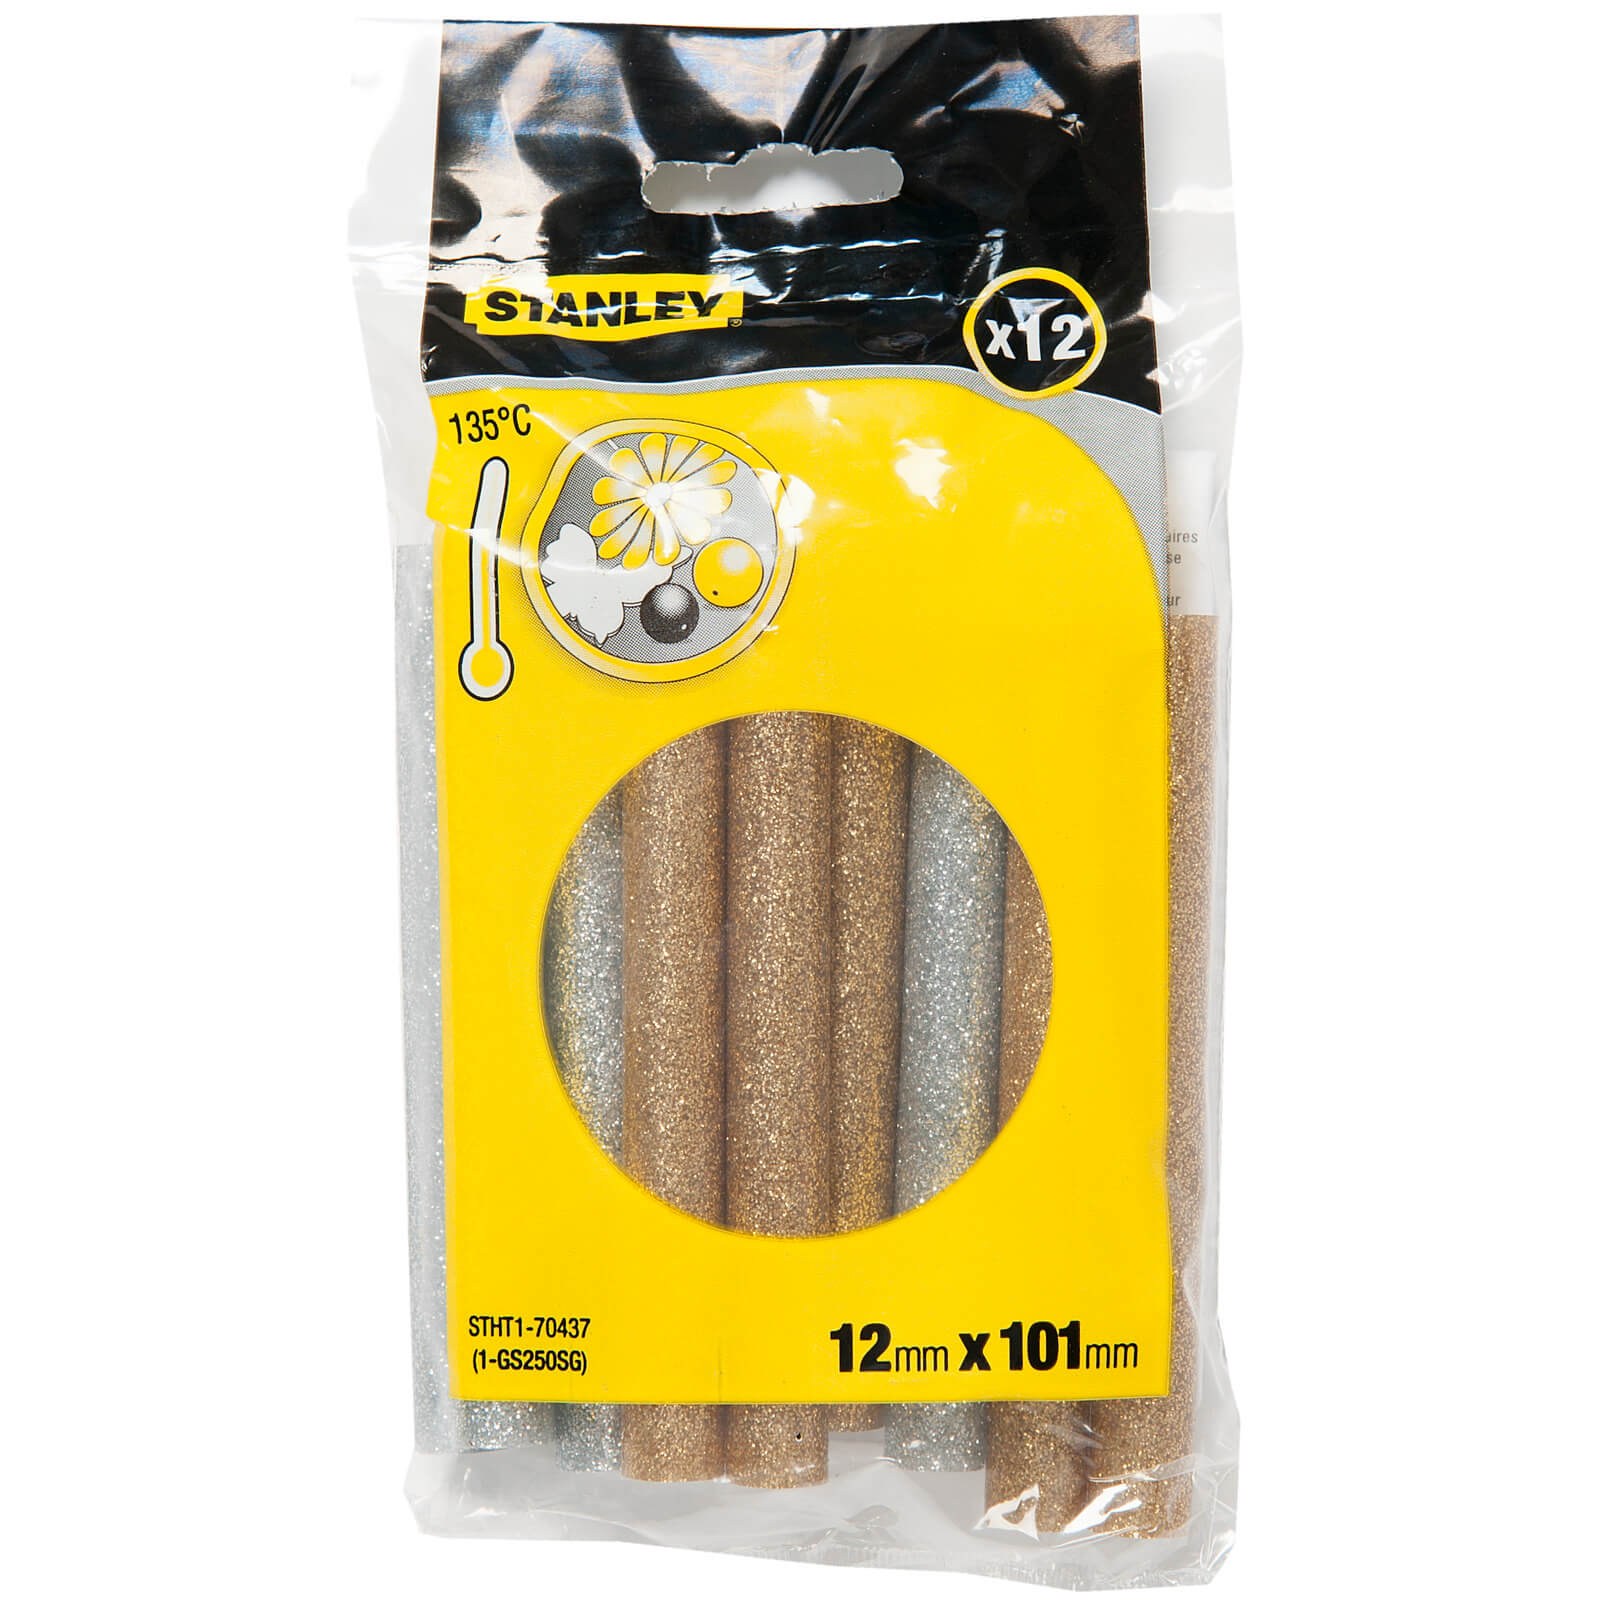 STANLEY Low Temperature Glitter Gold/Silver 12x101mm Glue Sticks- Pack of 12 (STHT1-70437)